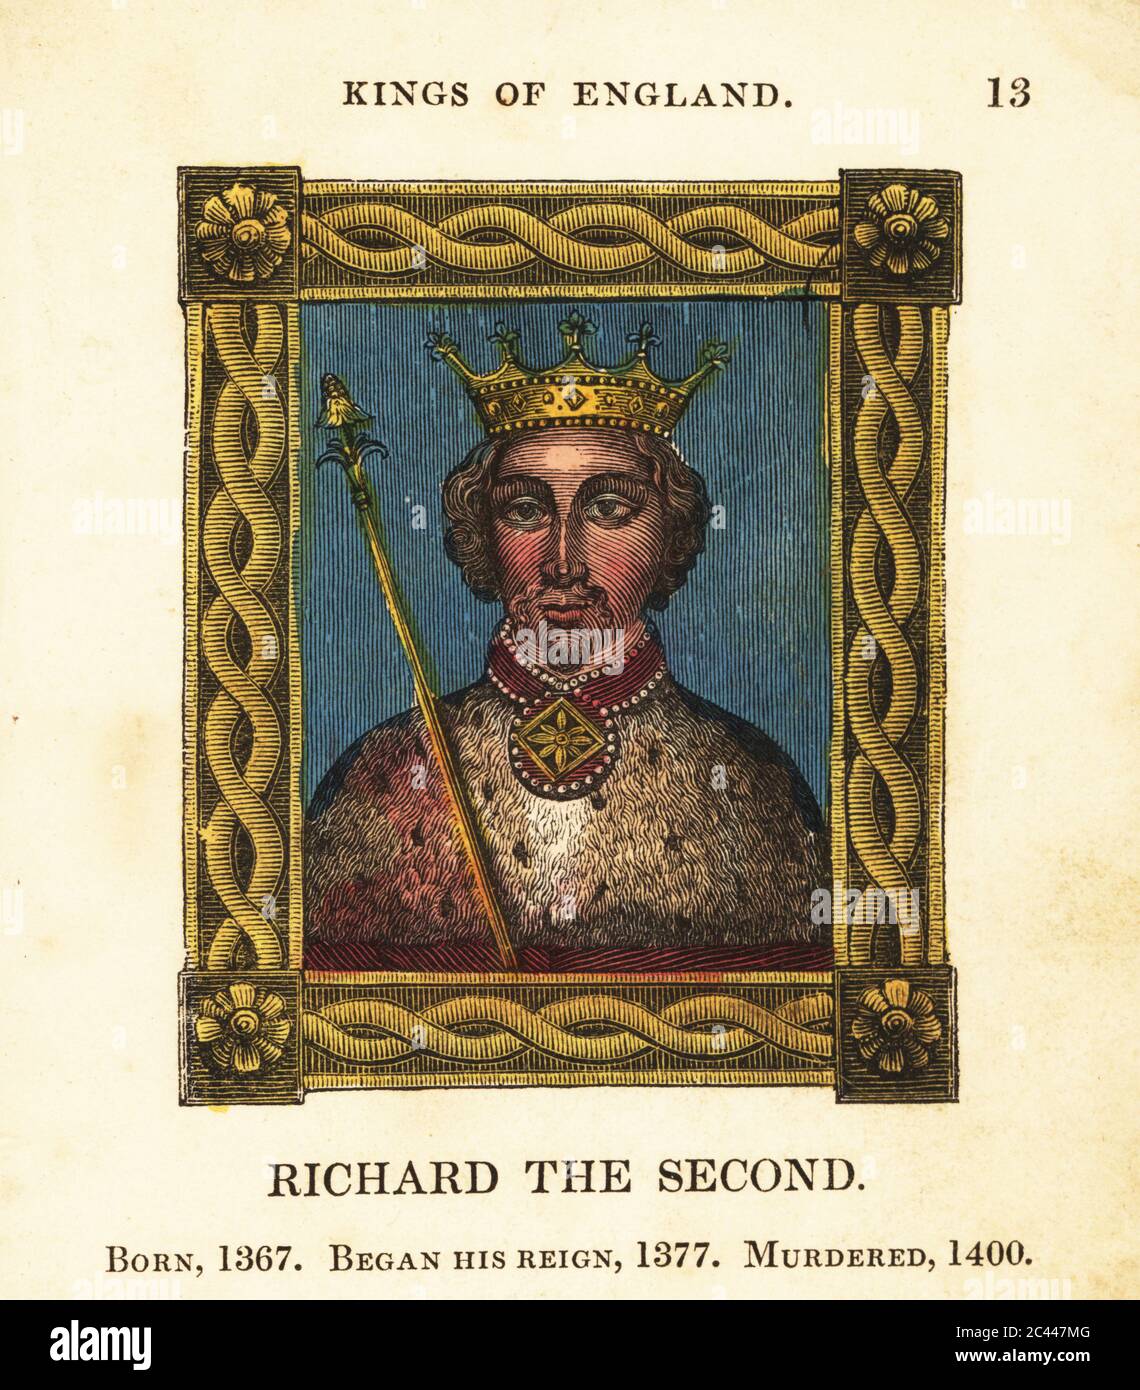 Portrait of King Richard the Second, King Richard II of England, born 1367, began reign 1377 and murdered 1400. In crown and ermine cape, holding a sceptre within ornate frame. Handcolored engraving by Cosmo Armstrong from Portraits and Characters of the Kings of England, from William the Conqueror to George the Third, John Harris, London, 1830. Stock Photo